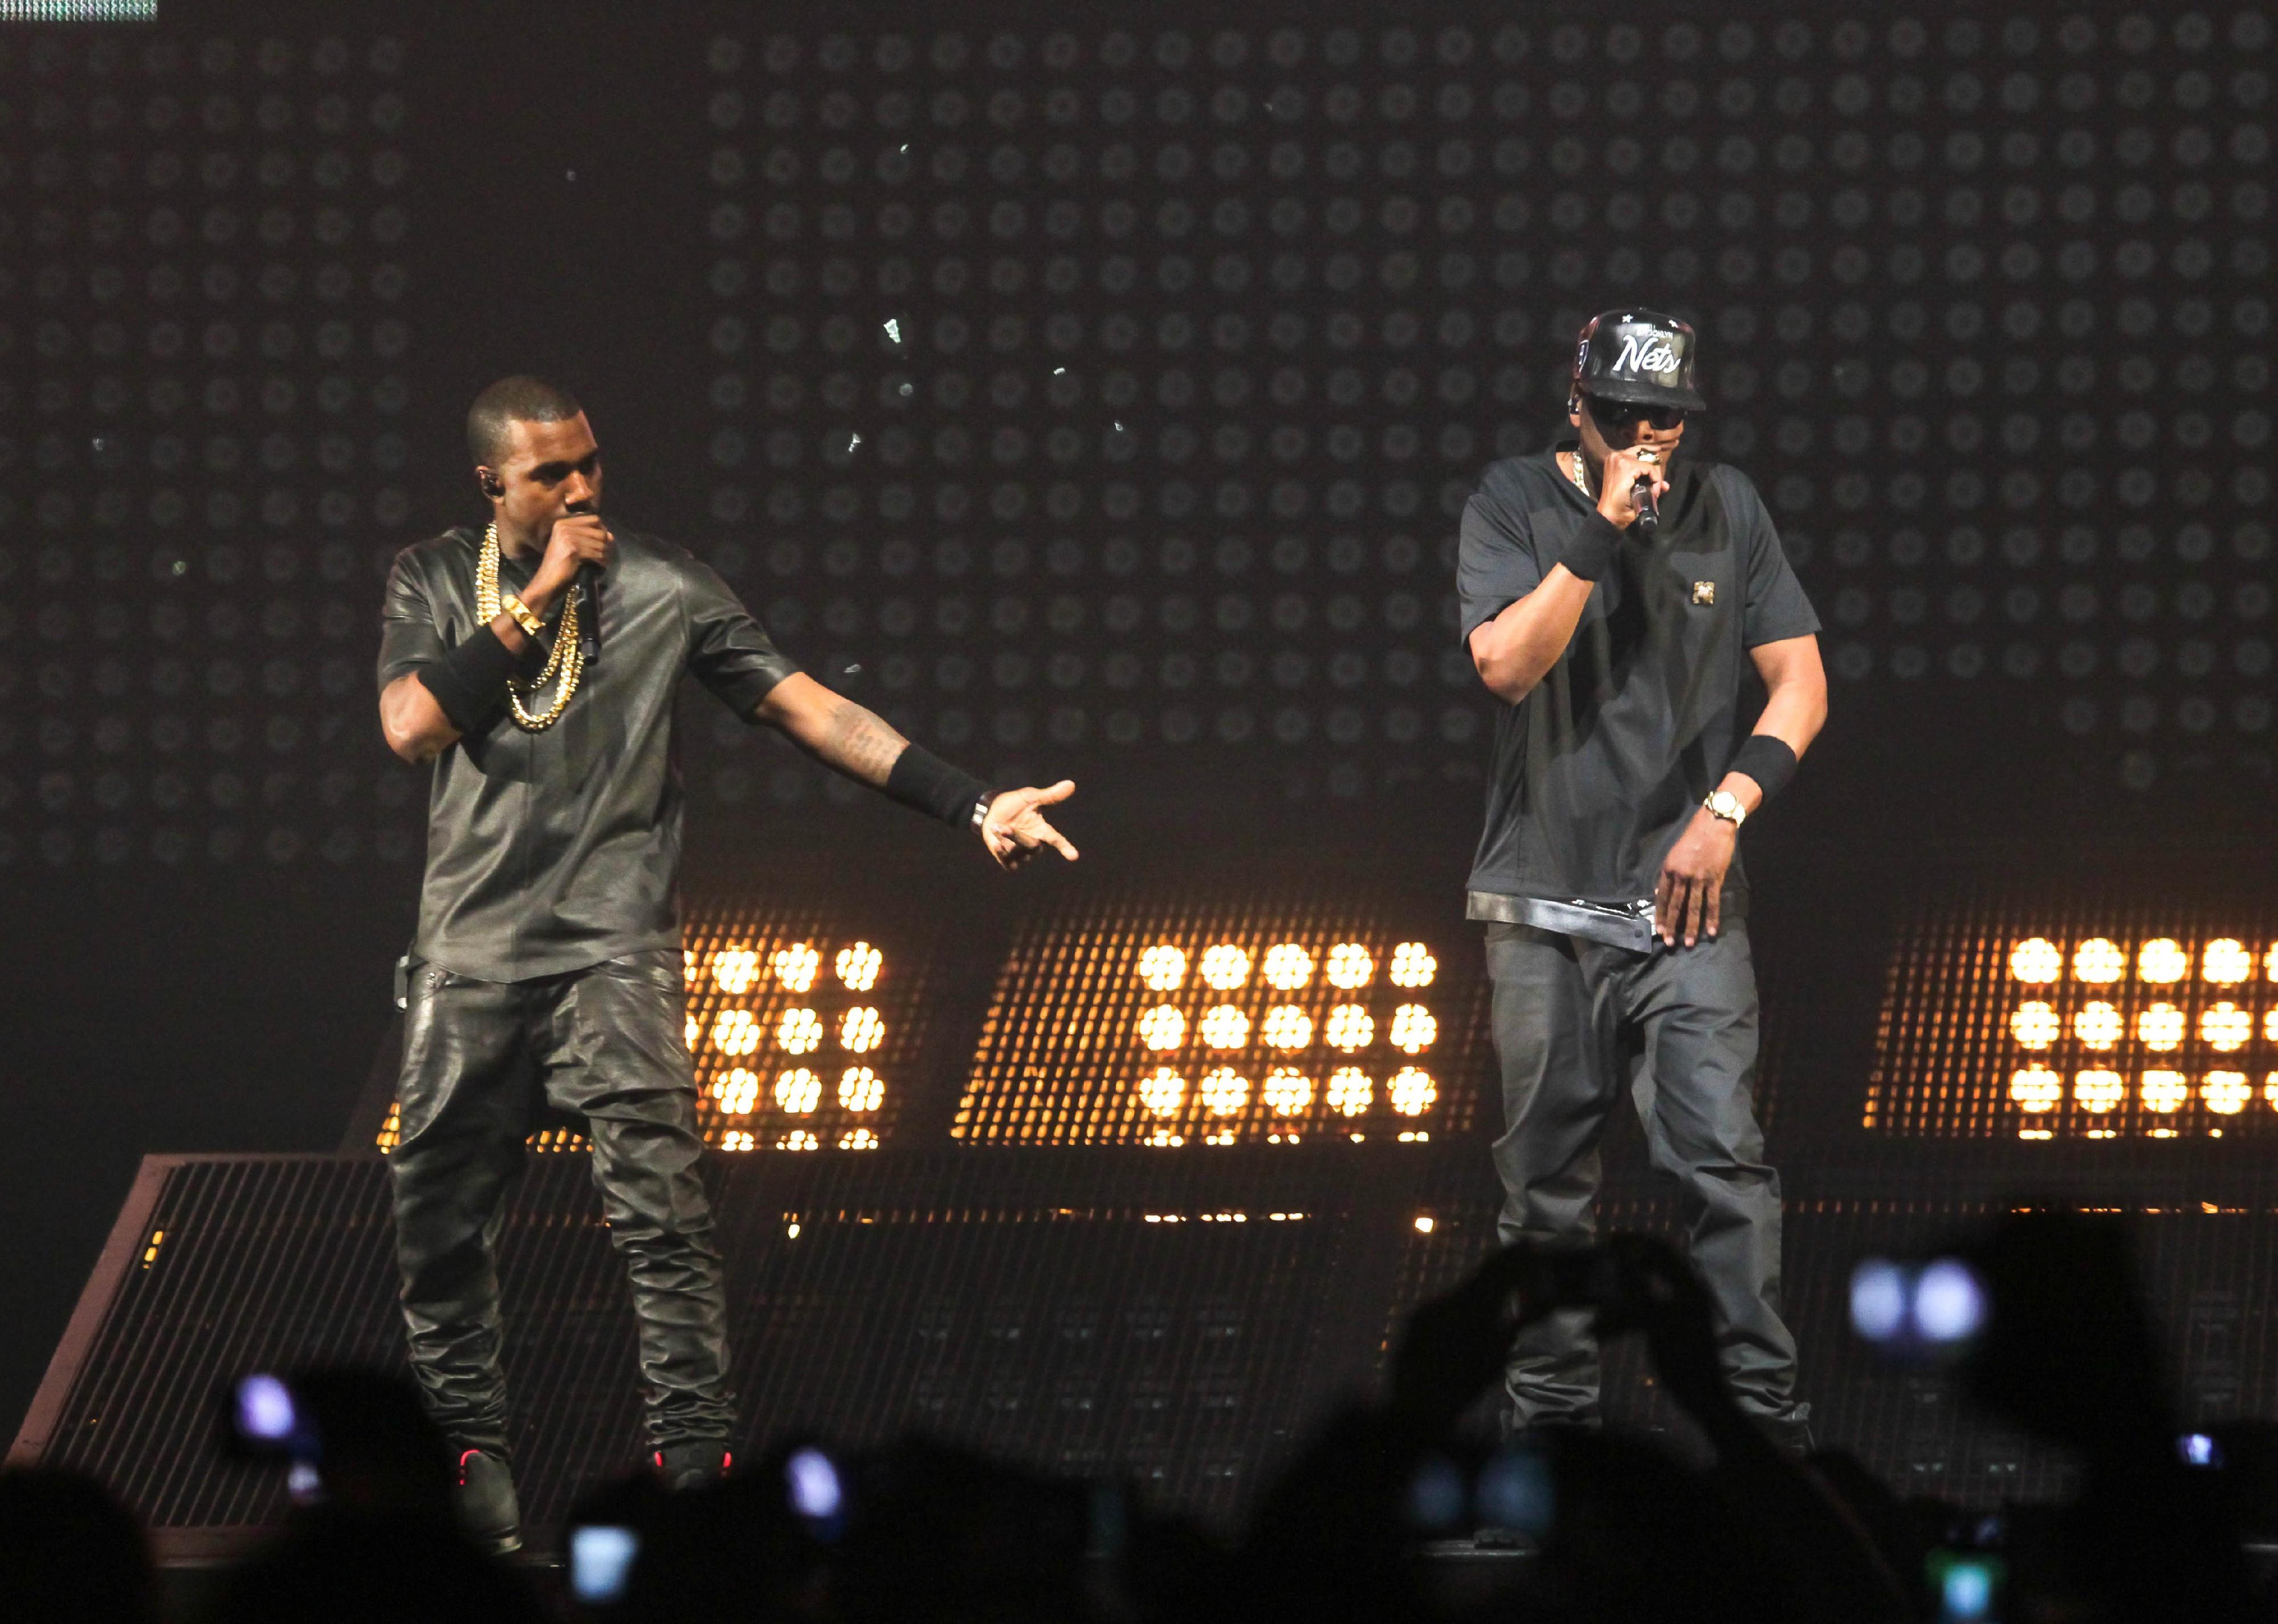 Rappers Jay-Z and Kanye West performing during the Watch The Throne Tour.